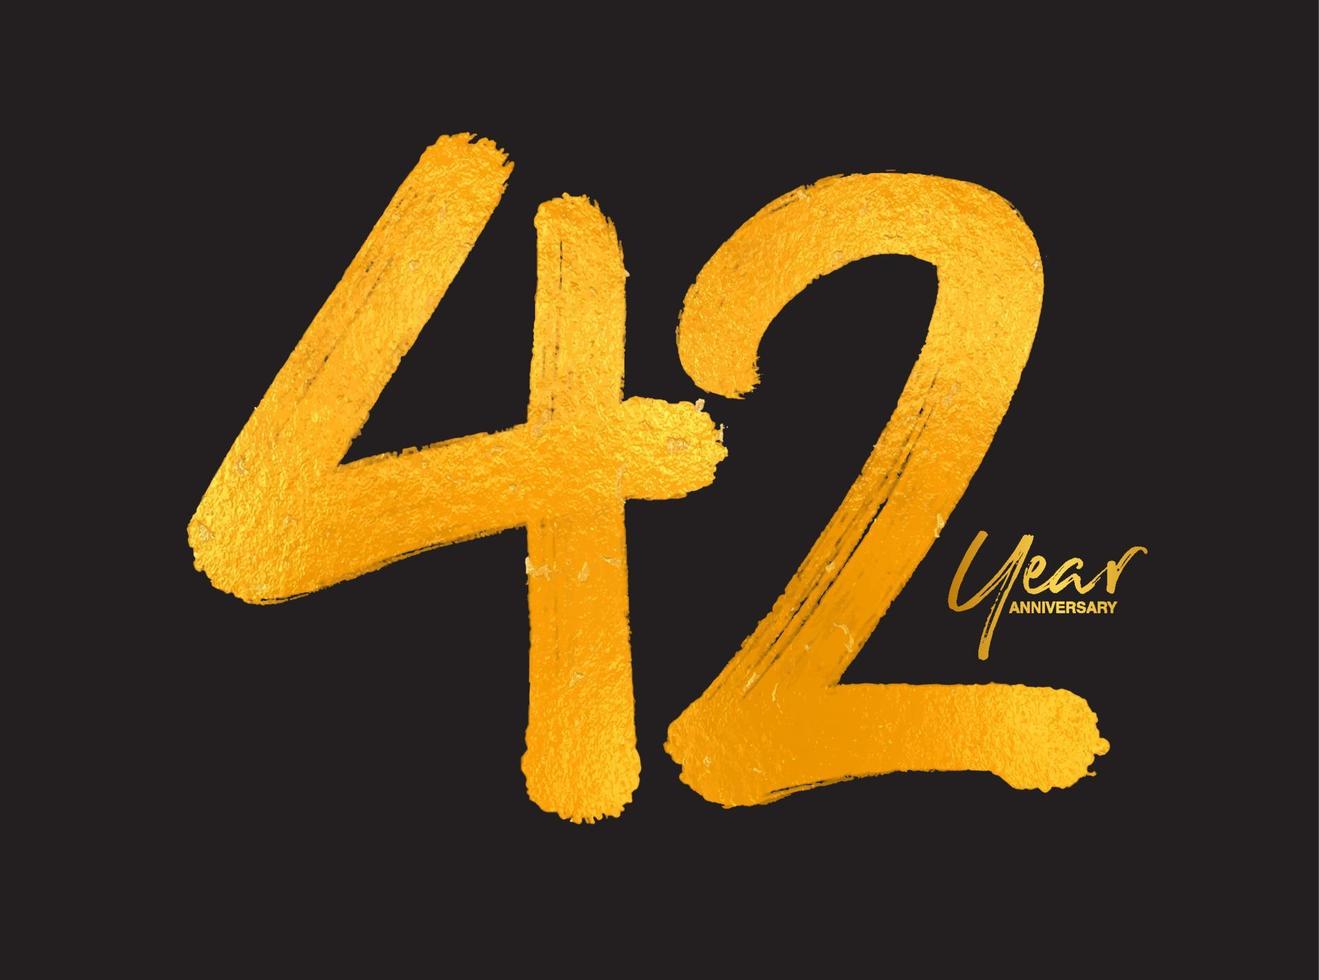 Gold 42 Years Anniversary Celebration Vector Template, 42 Years  logo design, 42th birthday, Gold Lettering Numbers brush drawing hand drawn sketch, number logo design vector illustration